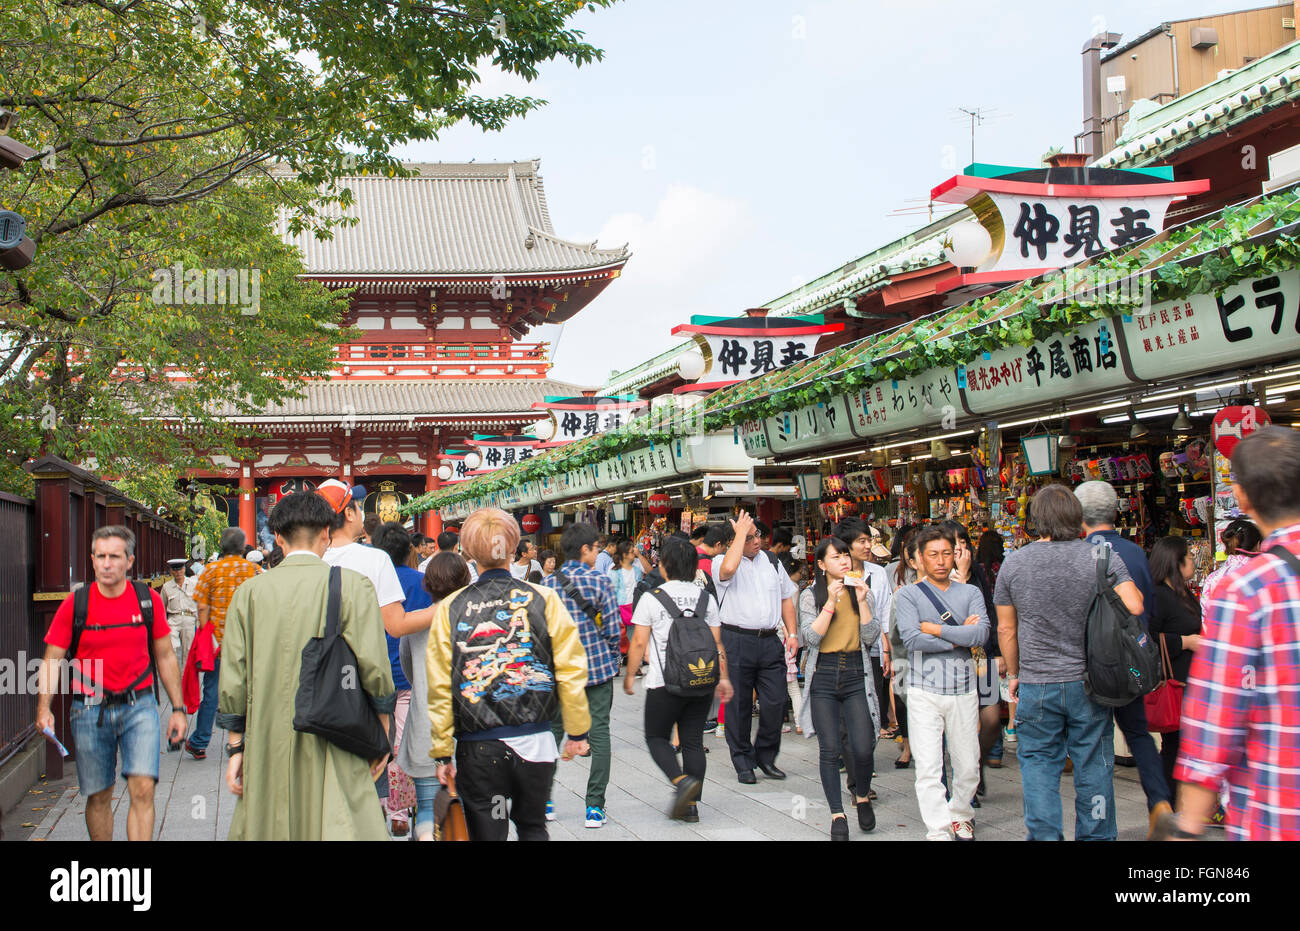 Tokyo Japan Sensoji Temple with crowds at Tokyo's oldest temple and important built in 645 founded Stock Photo